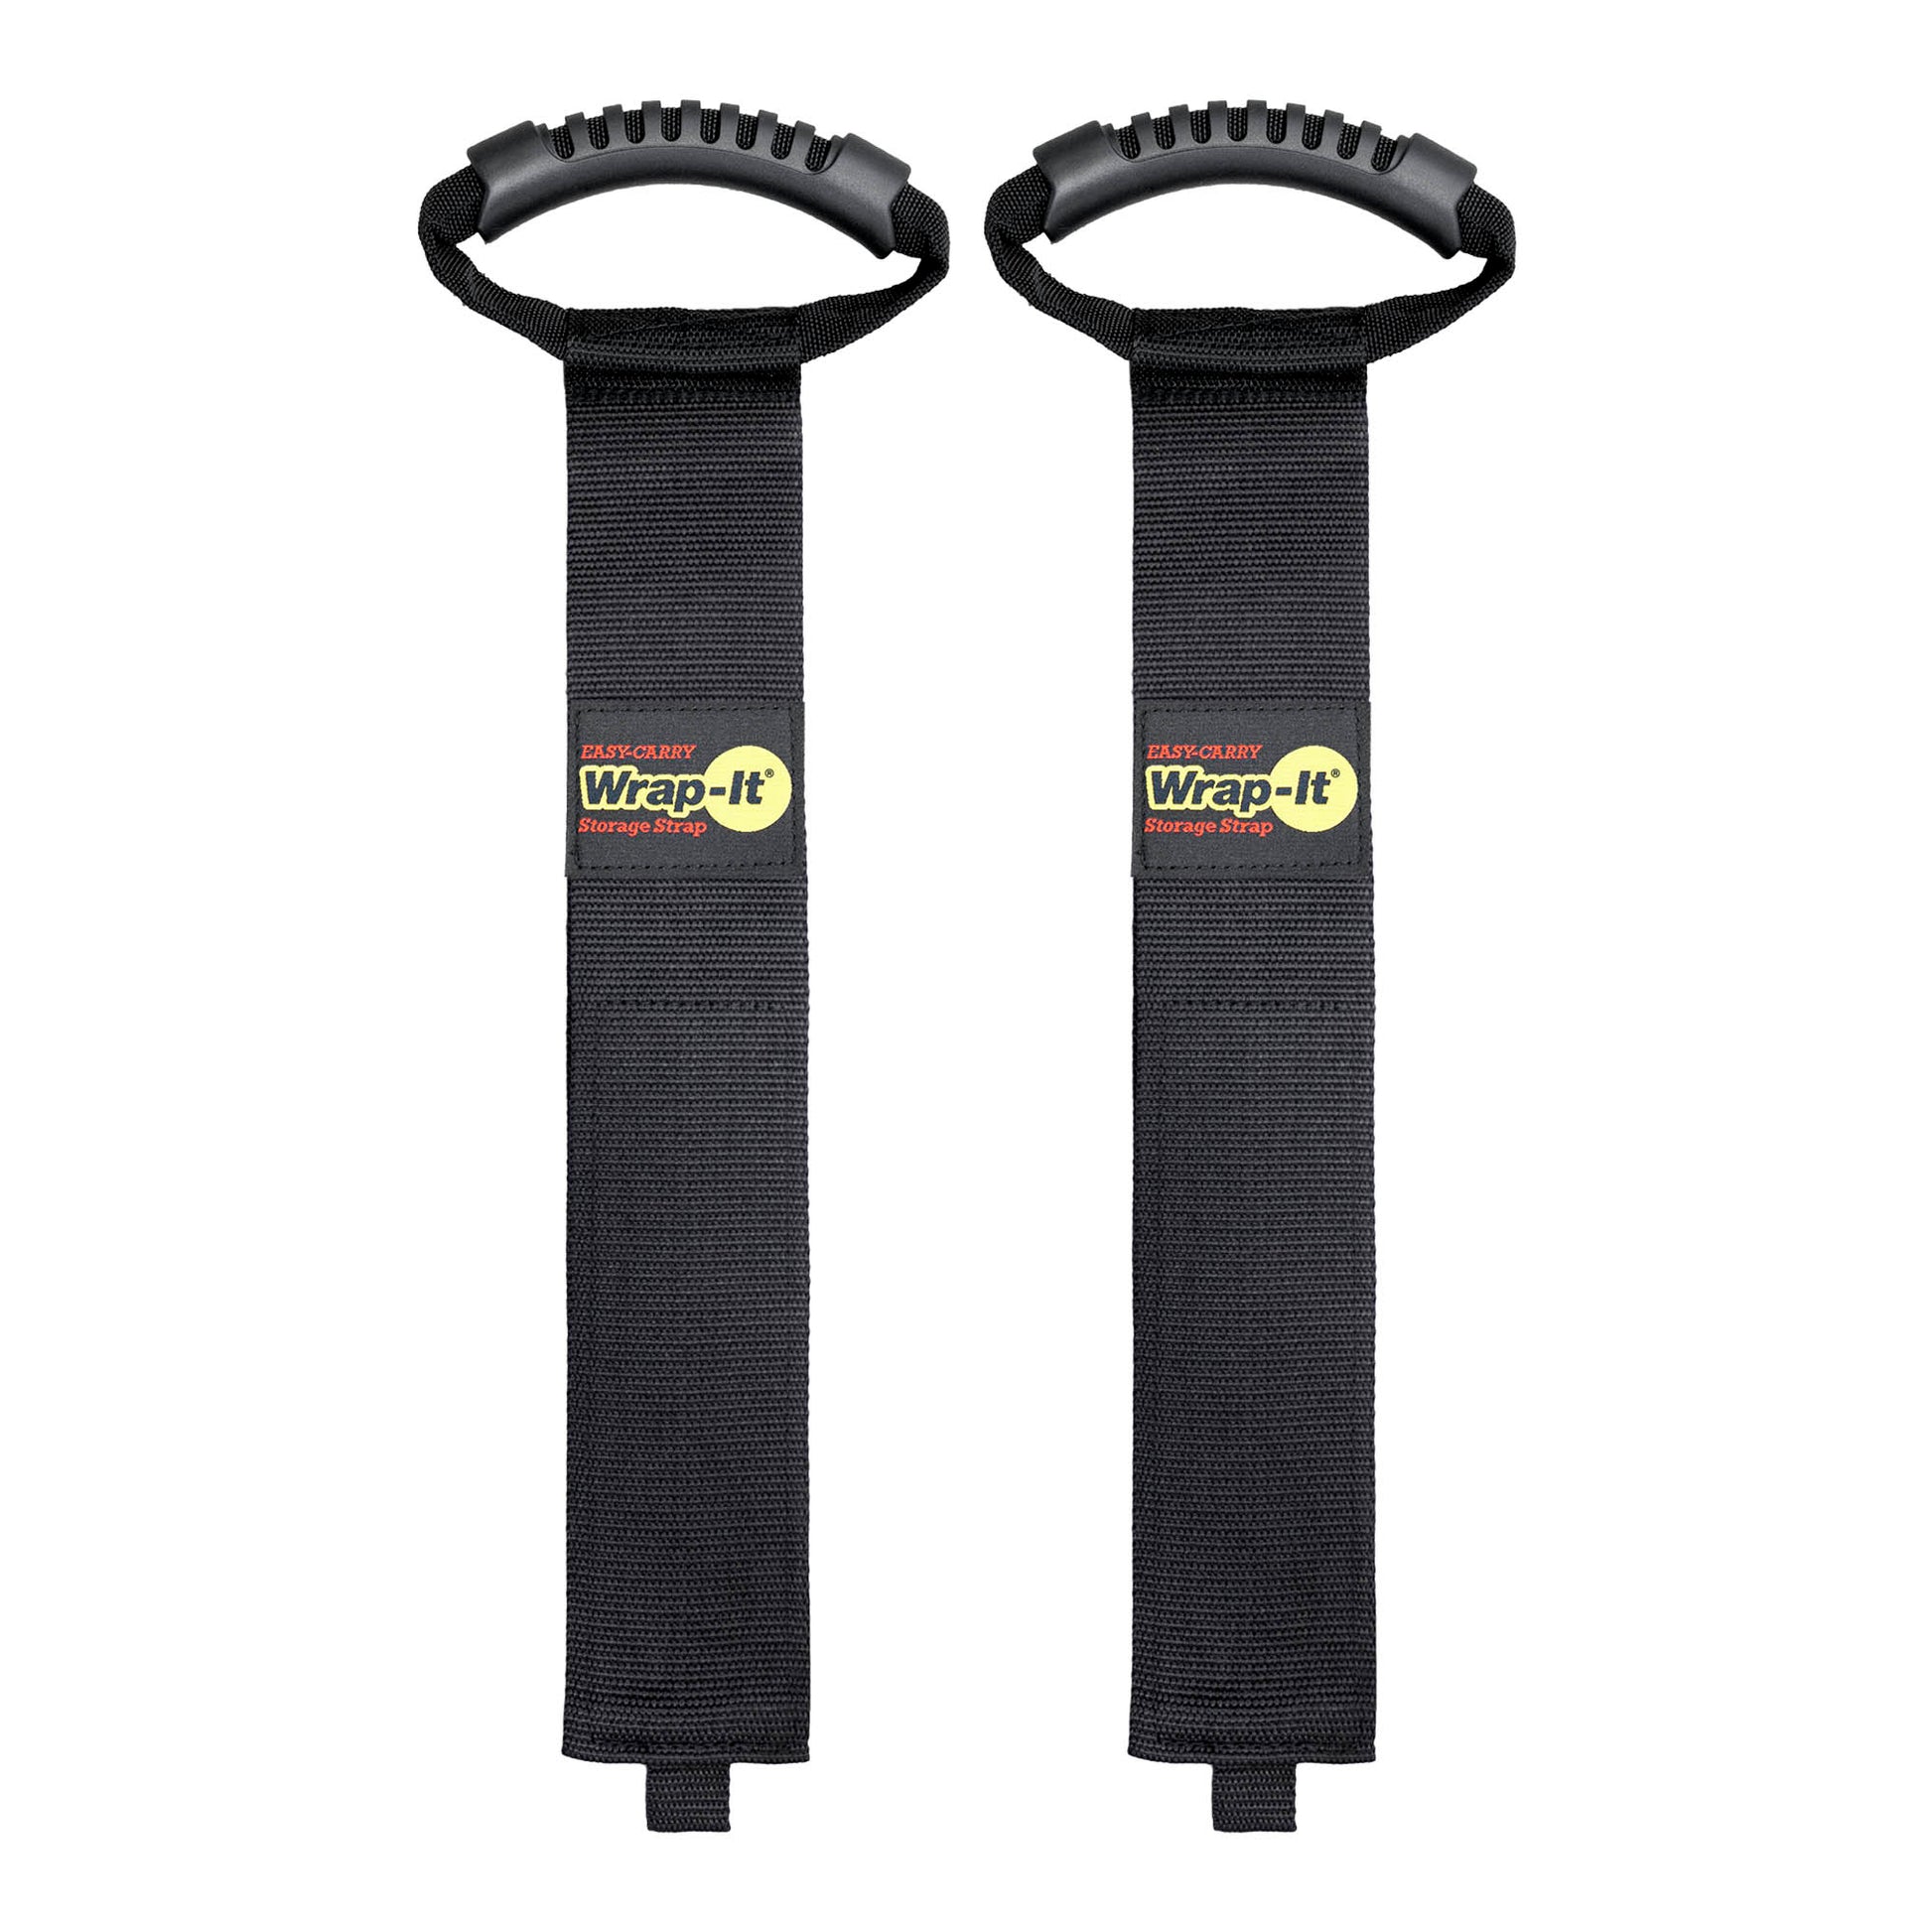 Easy-Carry Storage Straps - 36-in. (2-Pack) - Wrap-It Storage